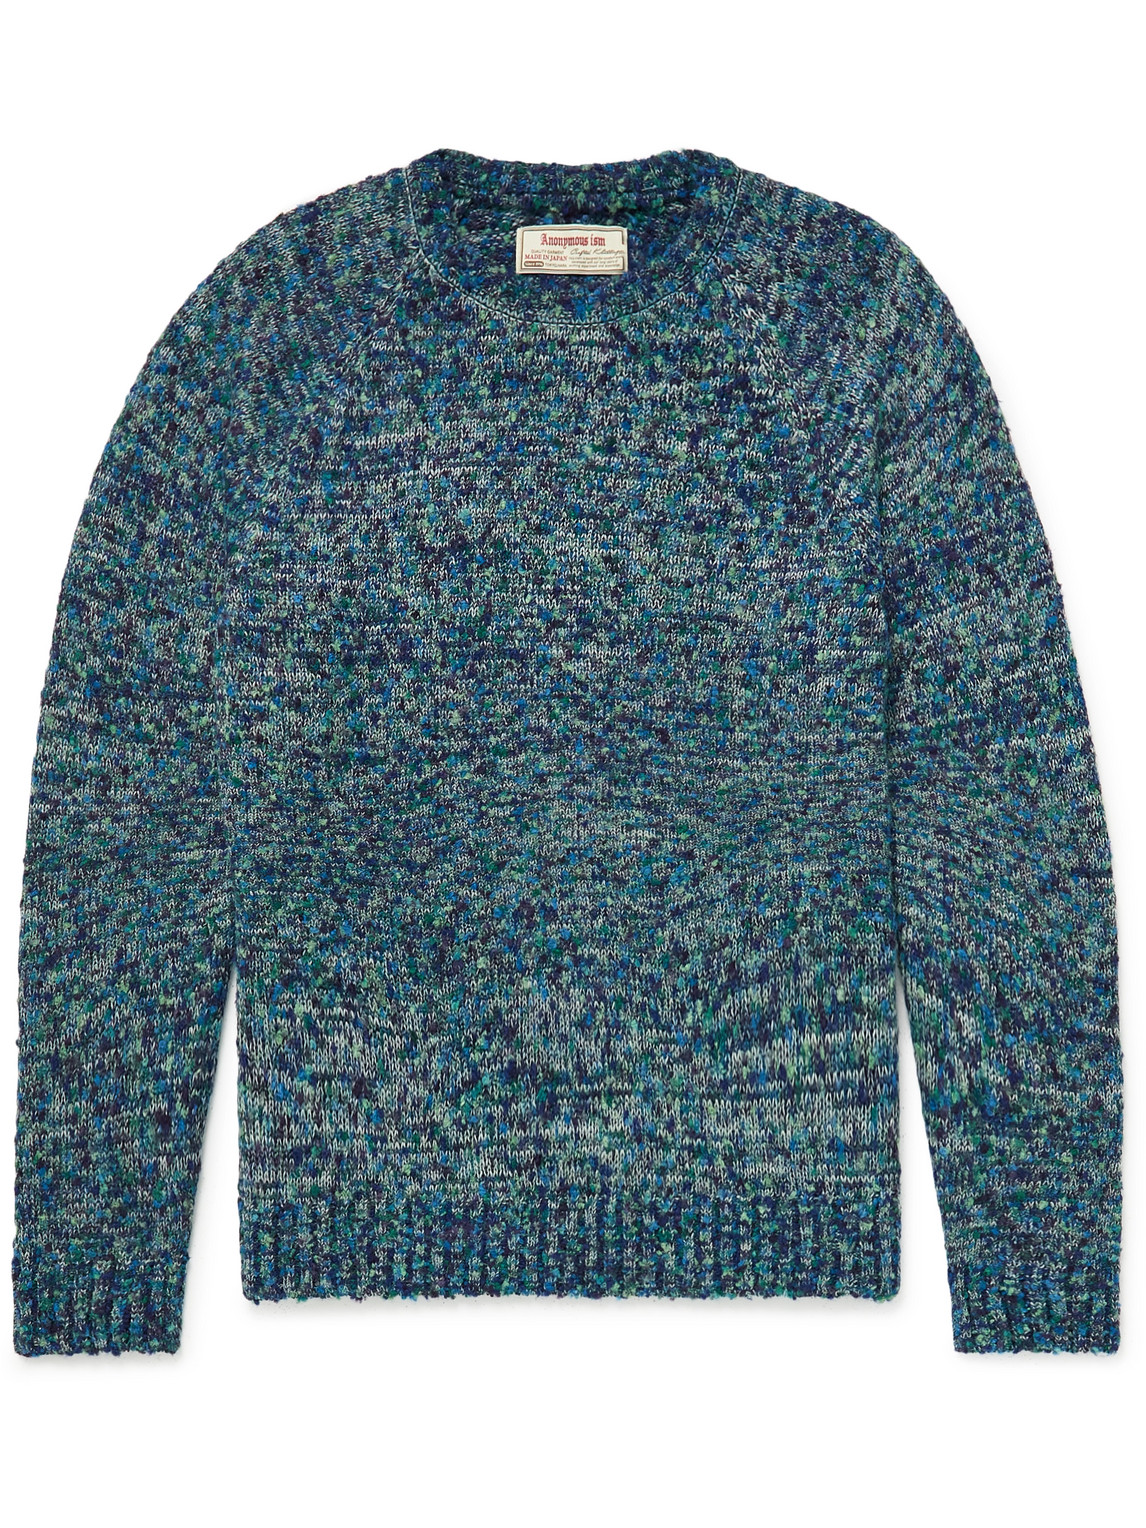 Anonymous Ism Slubbed Knitted Sweater In Blue